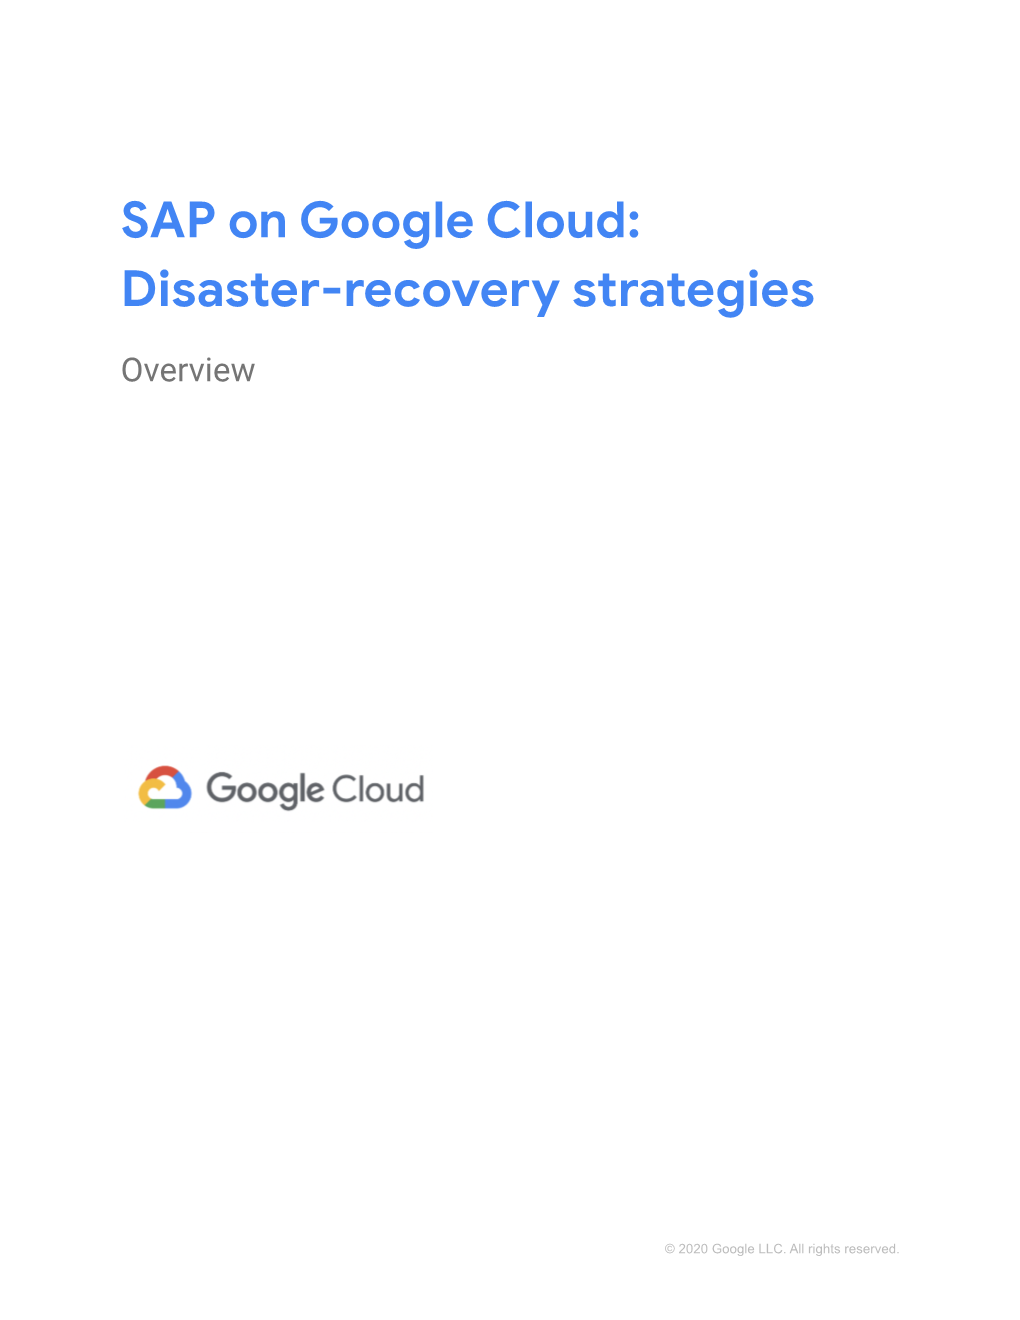 SAP on Google Cloud: Disaster Recovery Strategies